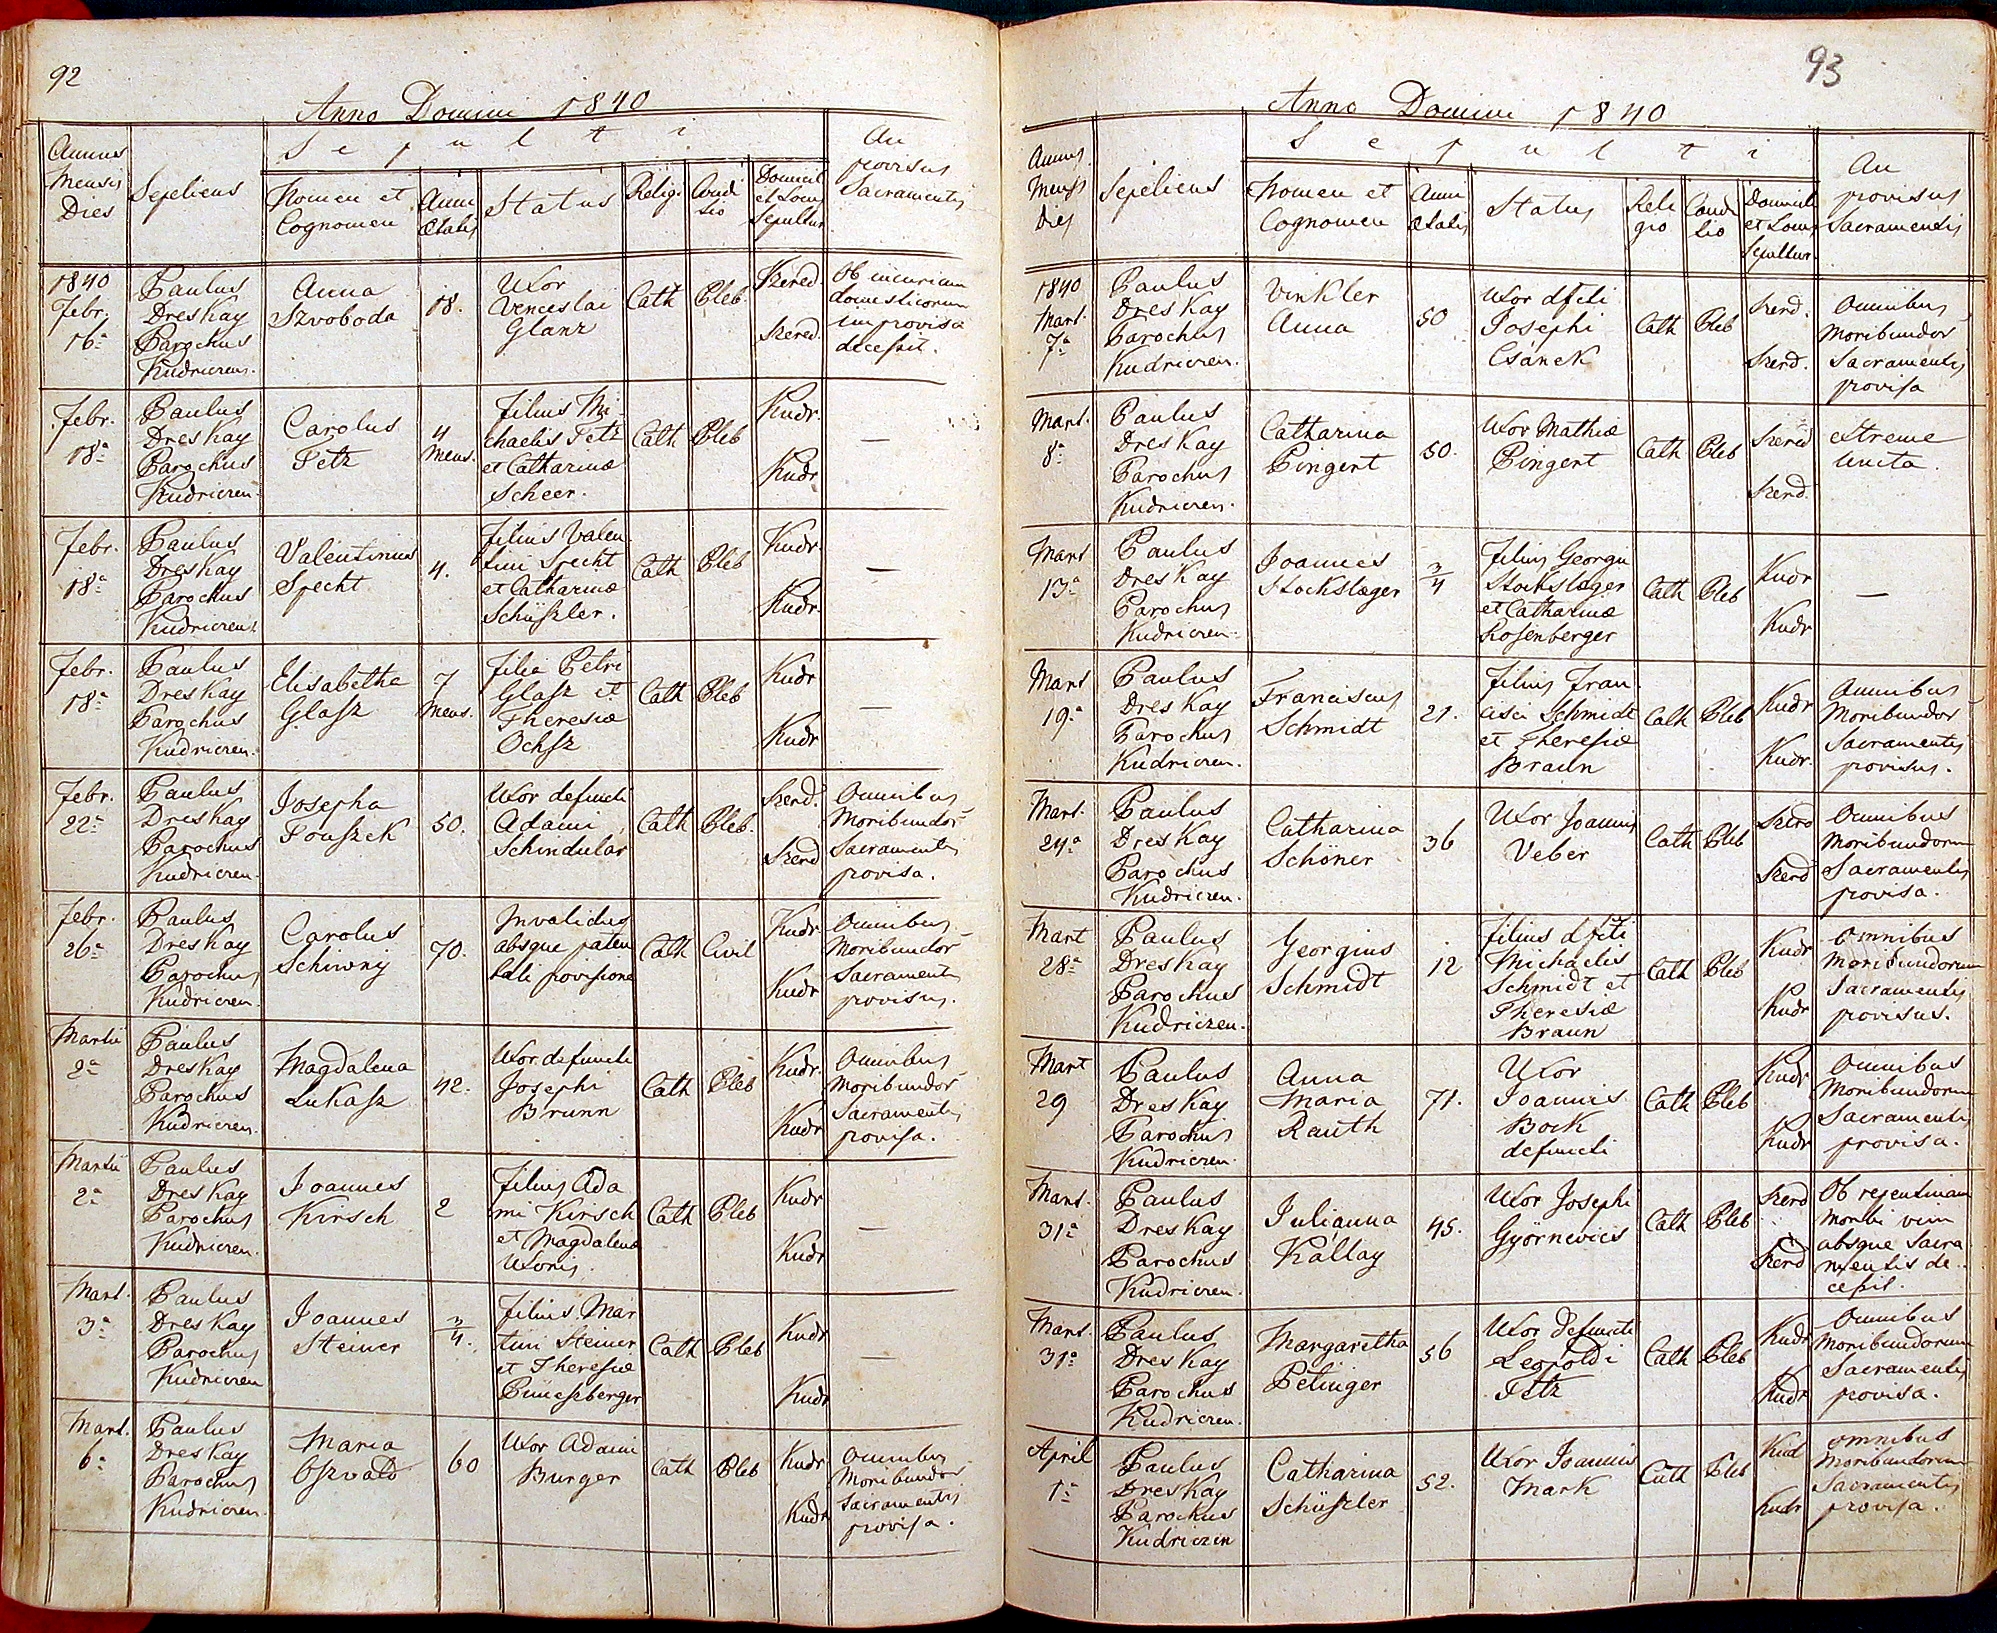 images/church_records/DEATHS/1829-1851D/092 i 093